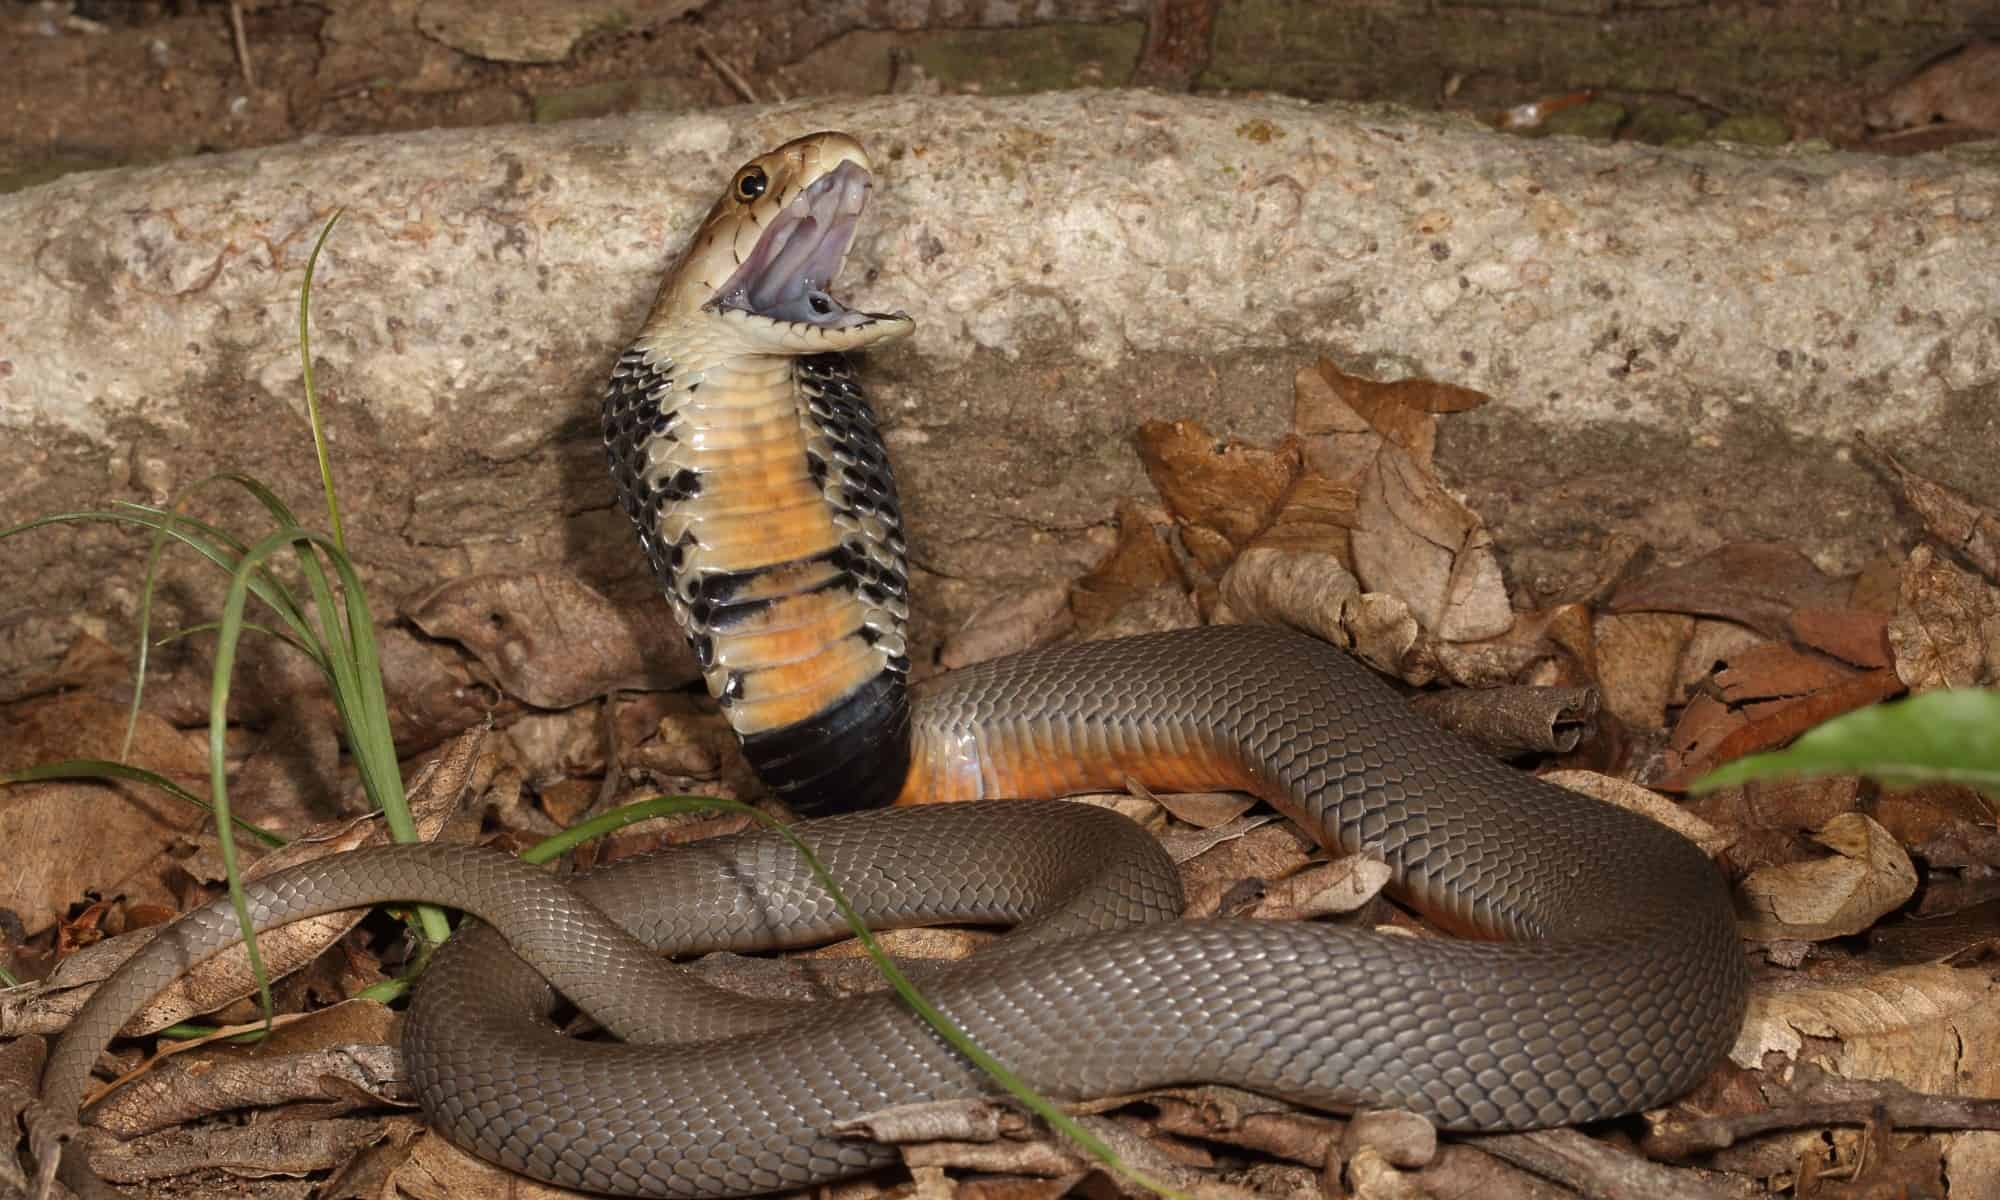 How long is a spitting cobra? According to Cape Snake Conservation